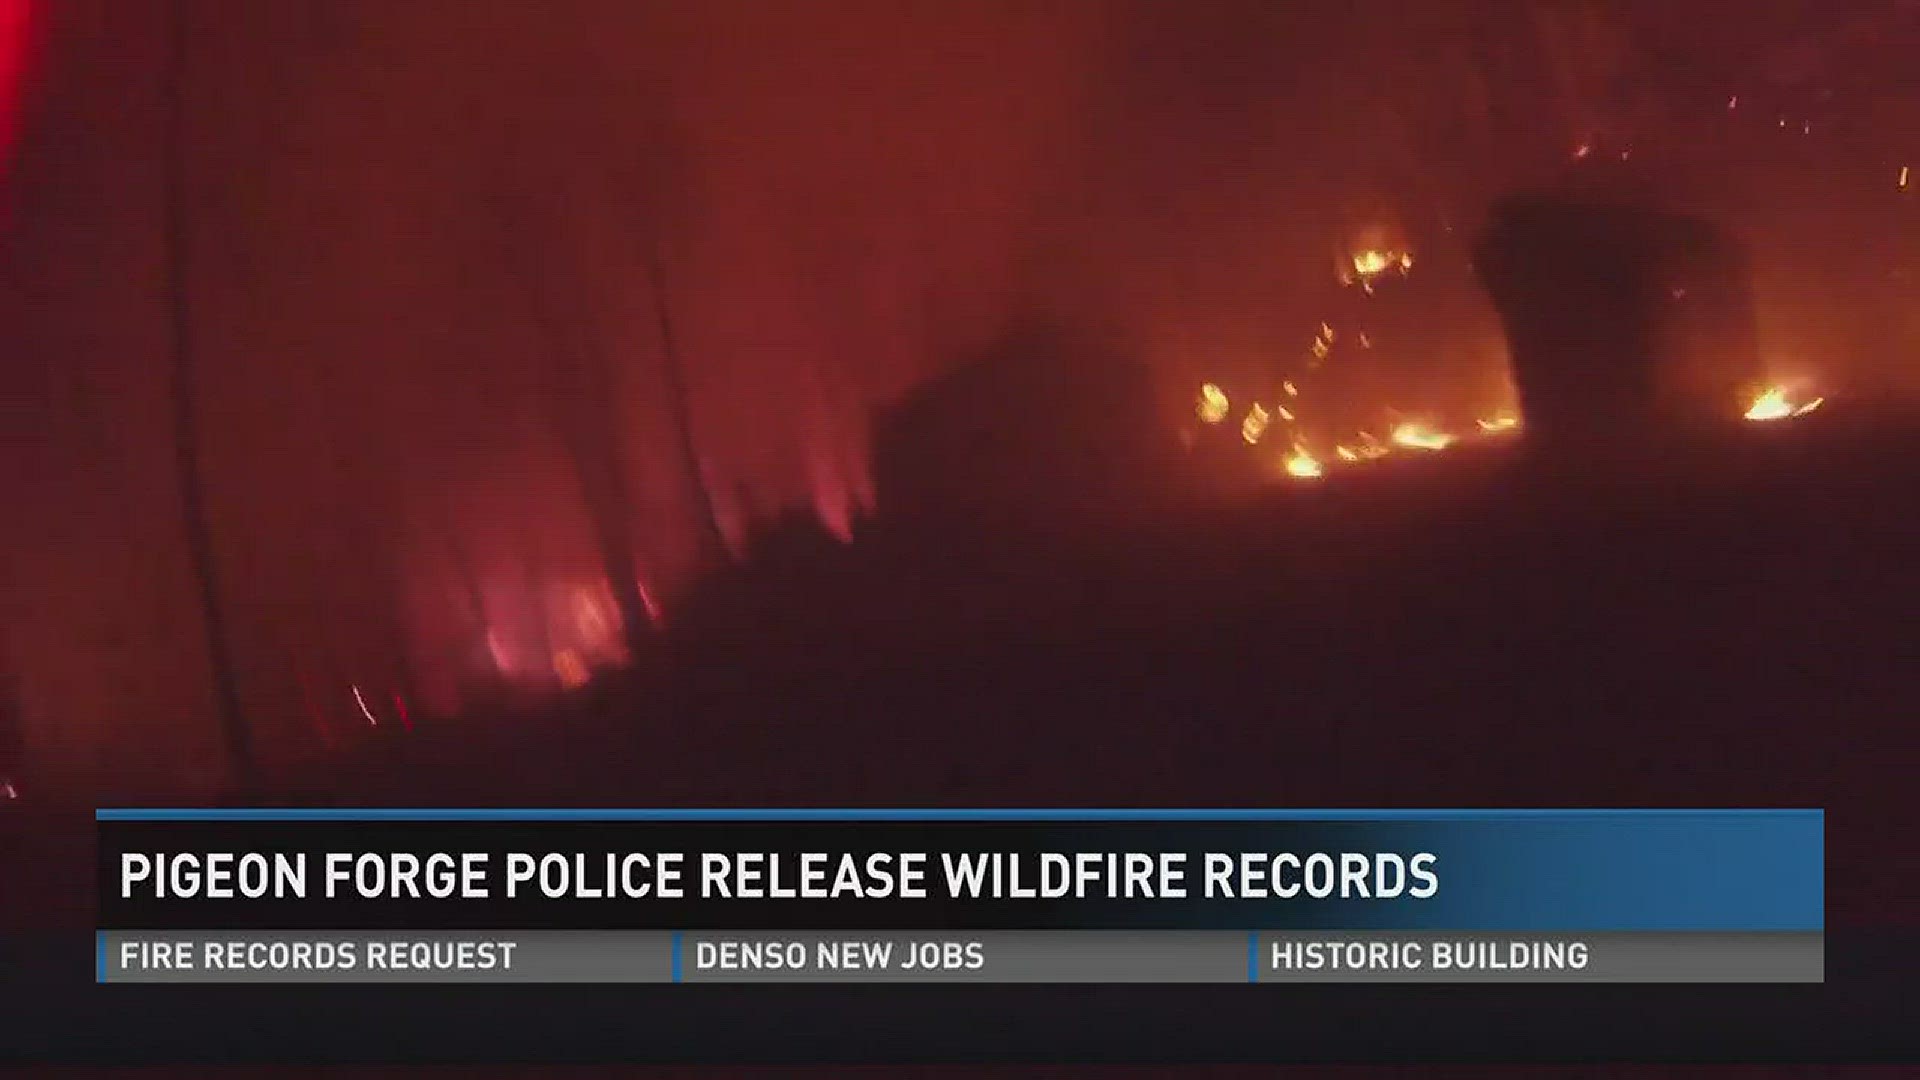 July 13, 2017: Newly-released records show Pigeon Forge police officers worked to help people fleeing from wildfires in Gatlinburg